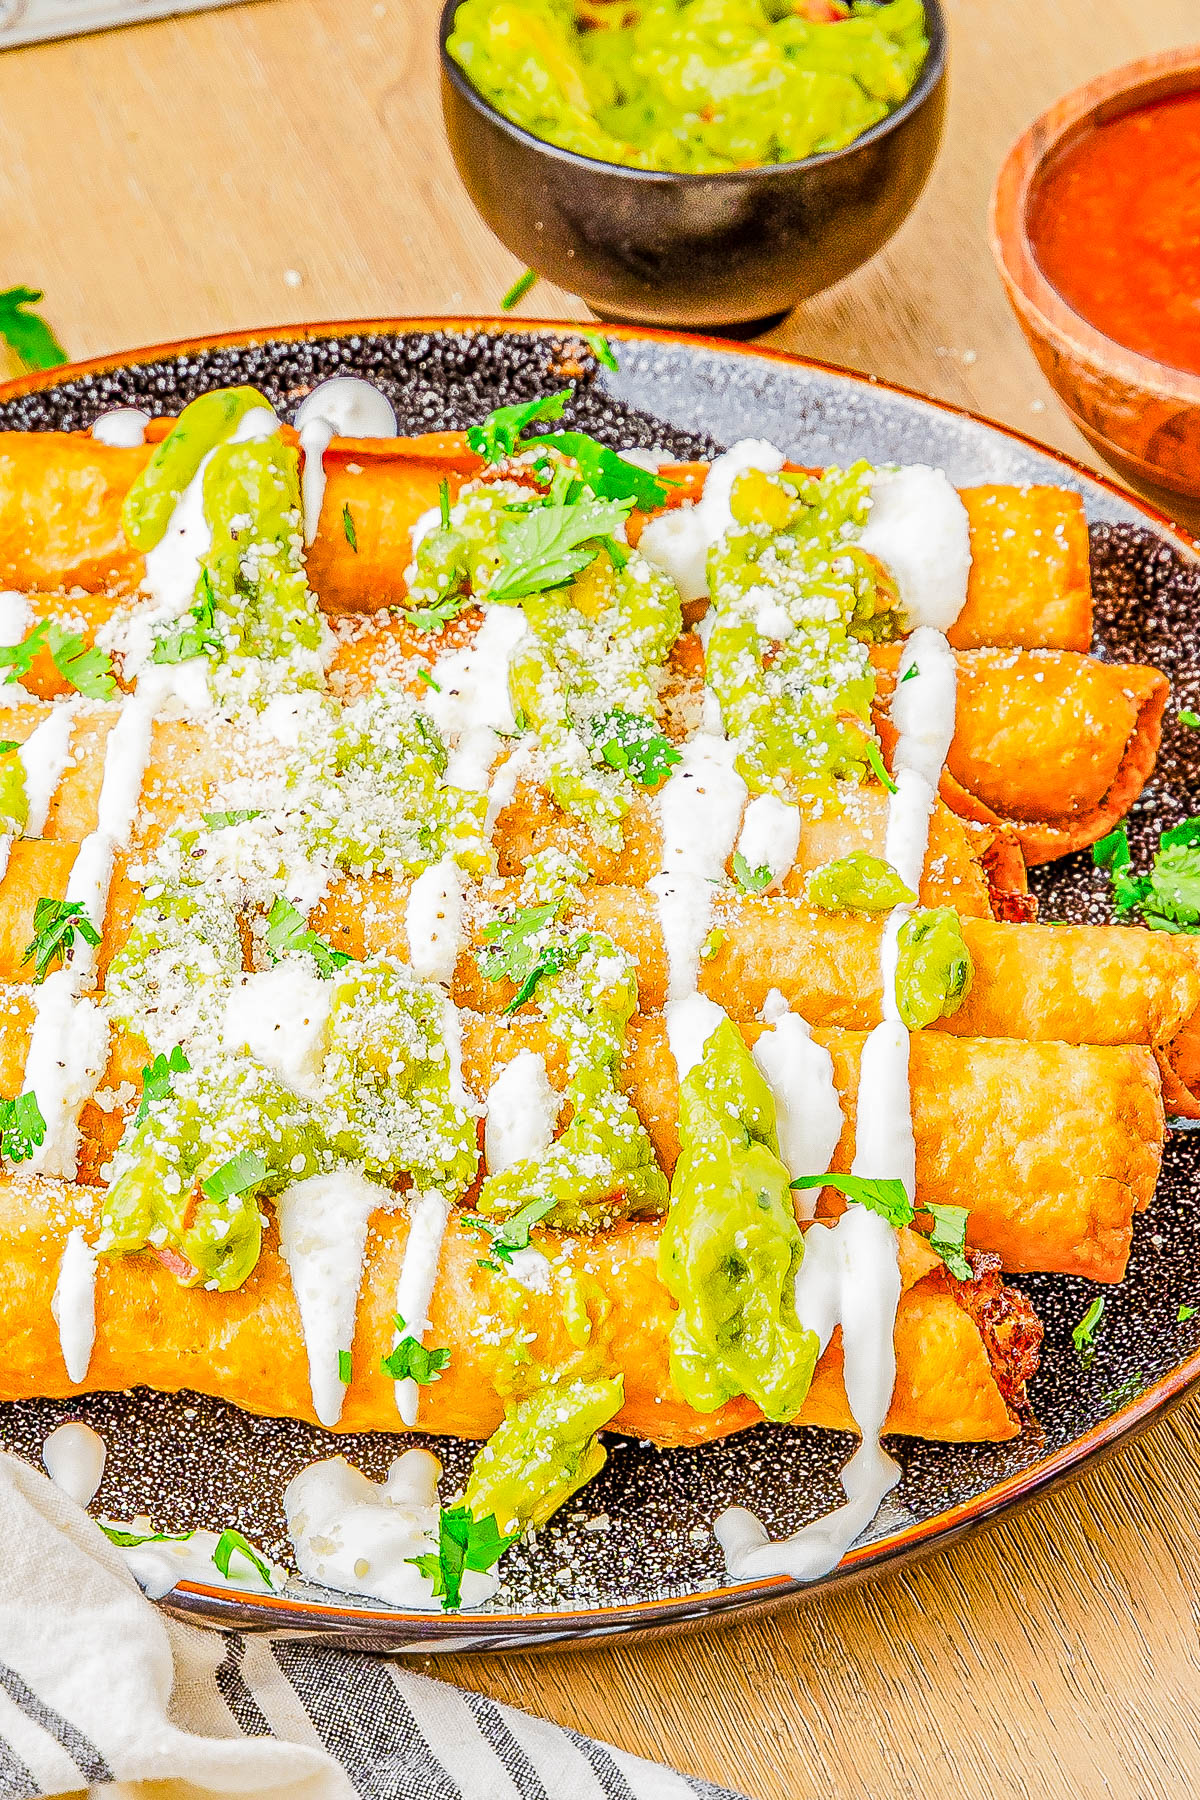 A plate of crispy taquitos topped with green salsa, sour cream, and crumbled cheese, garnished with fresh cilantro.